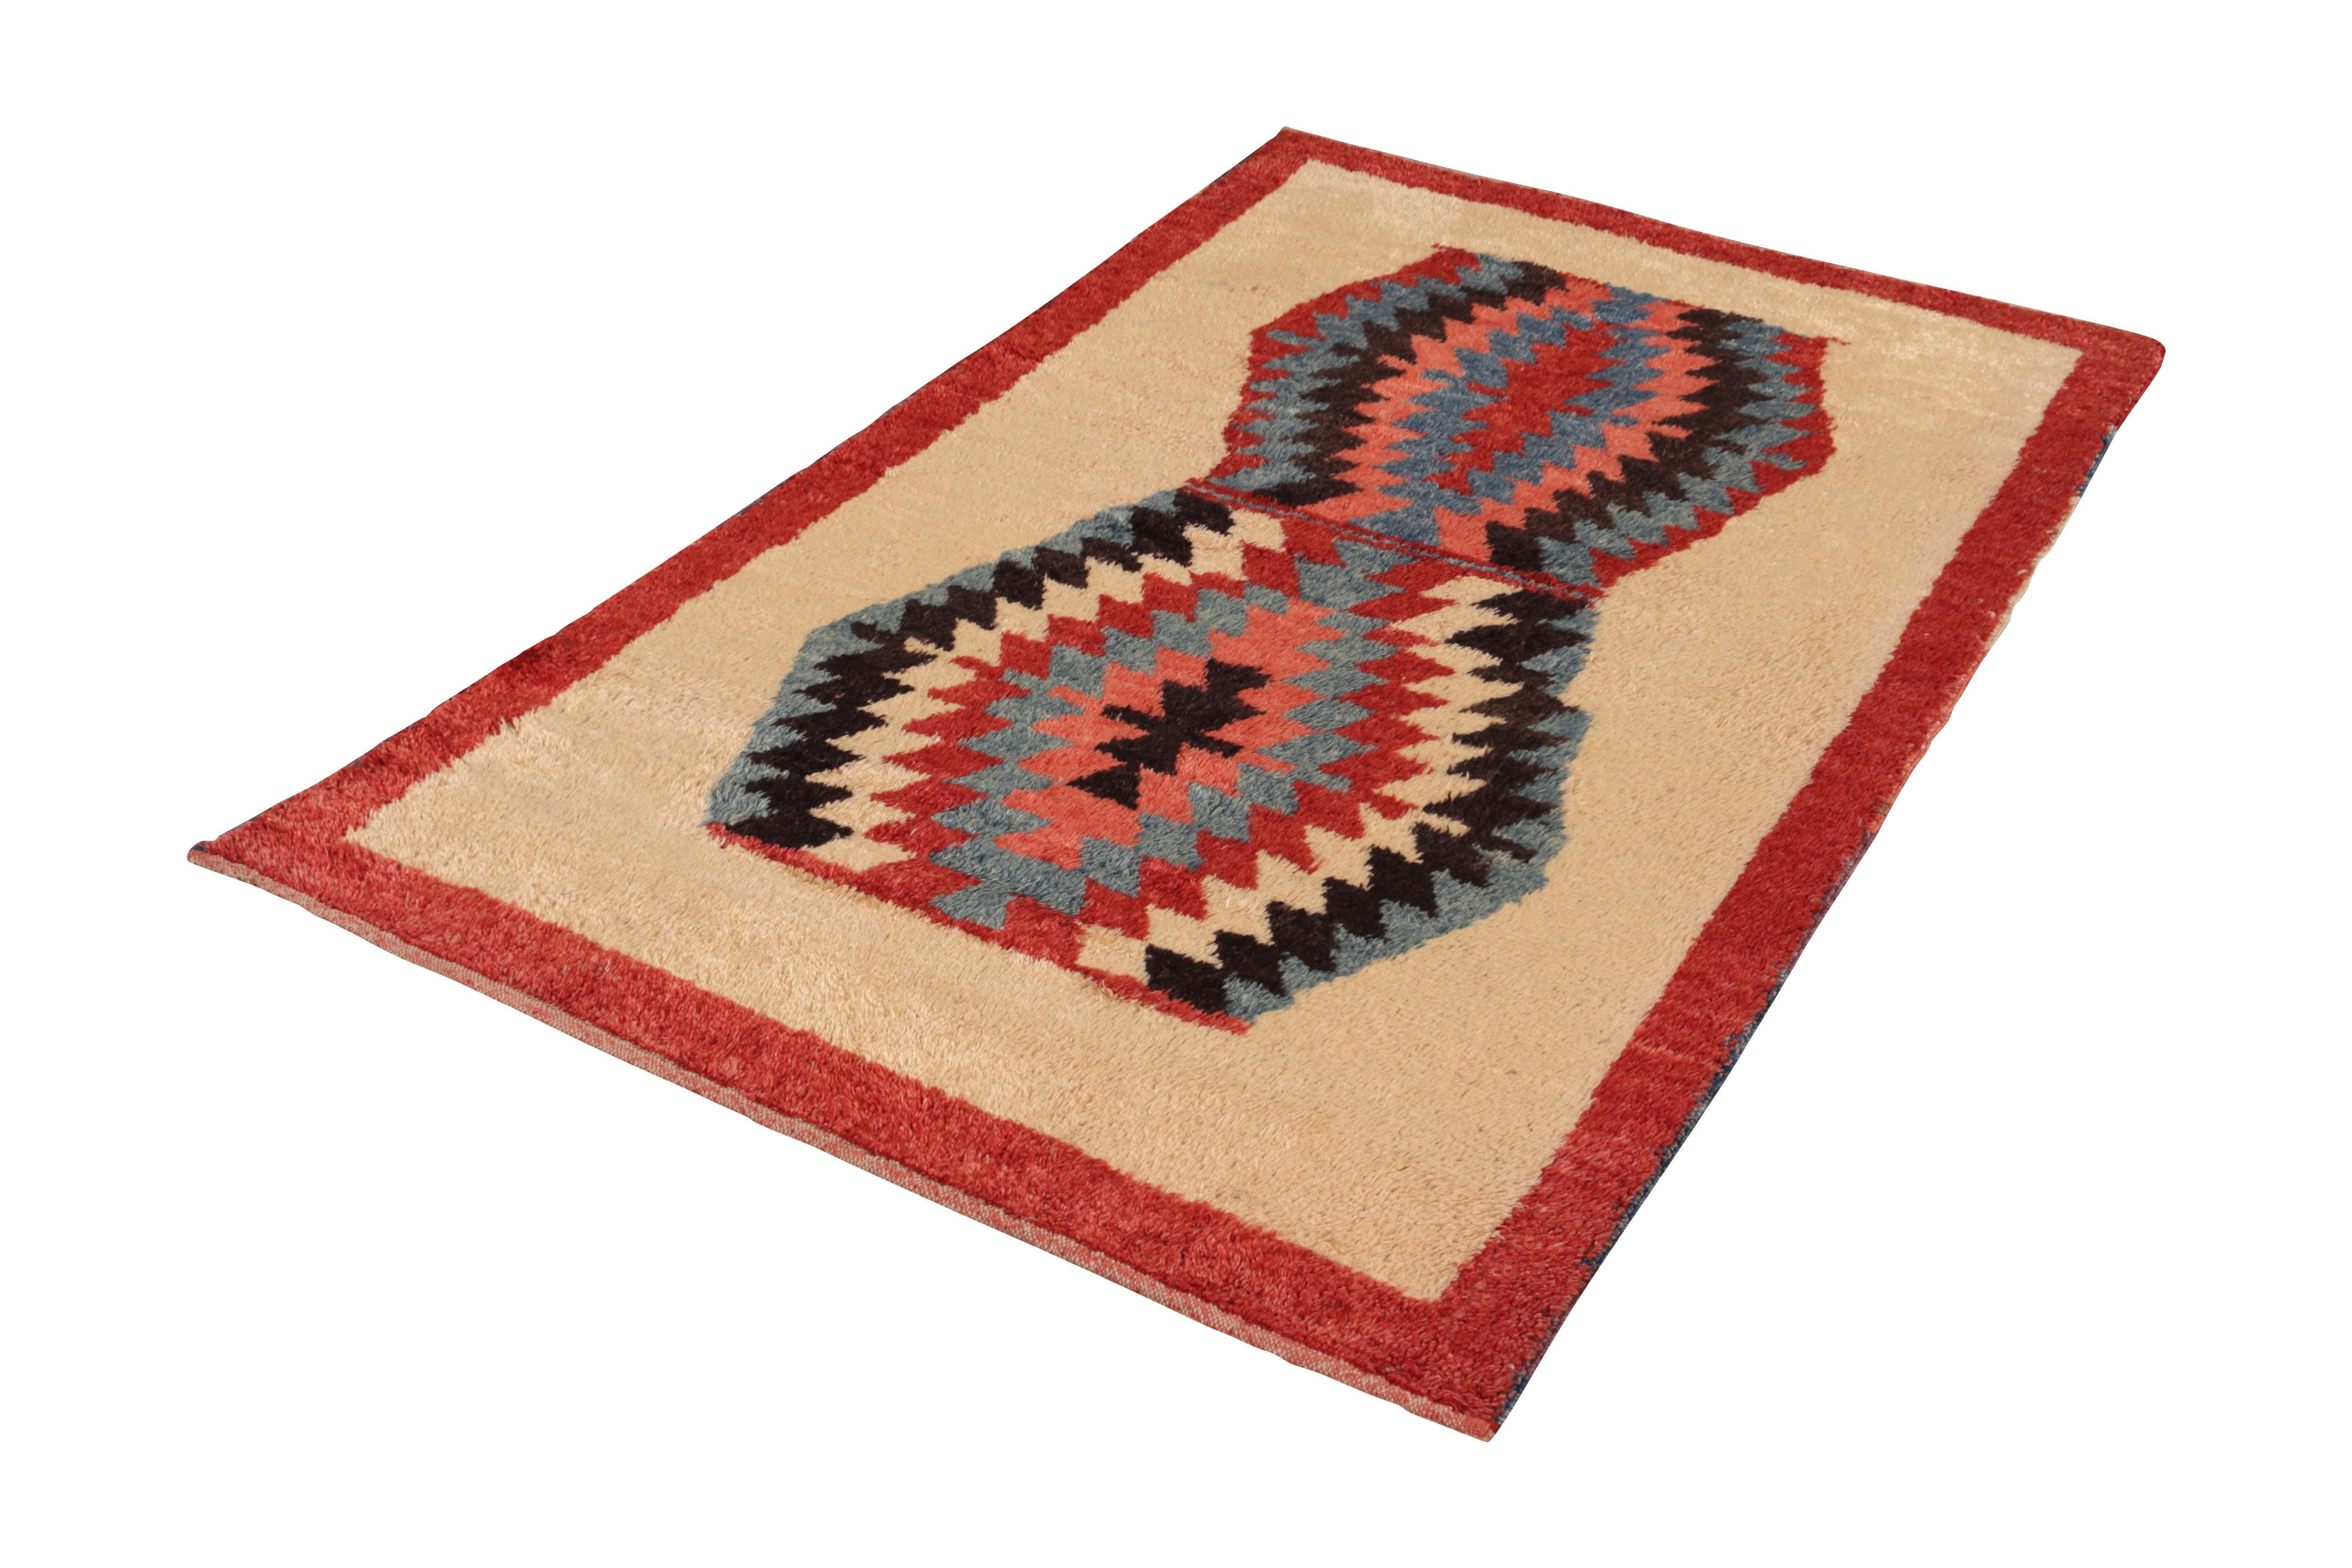 This hand knotted tribal rug represents a Tulu style design from the Modern Classics collection by Rug & Kilim, a variety of celebrated Classic rug styles recaptured with modern and contemporary quality since the inception of the line in the 1980s.